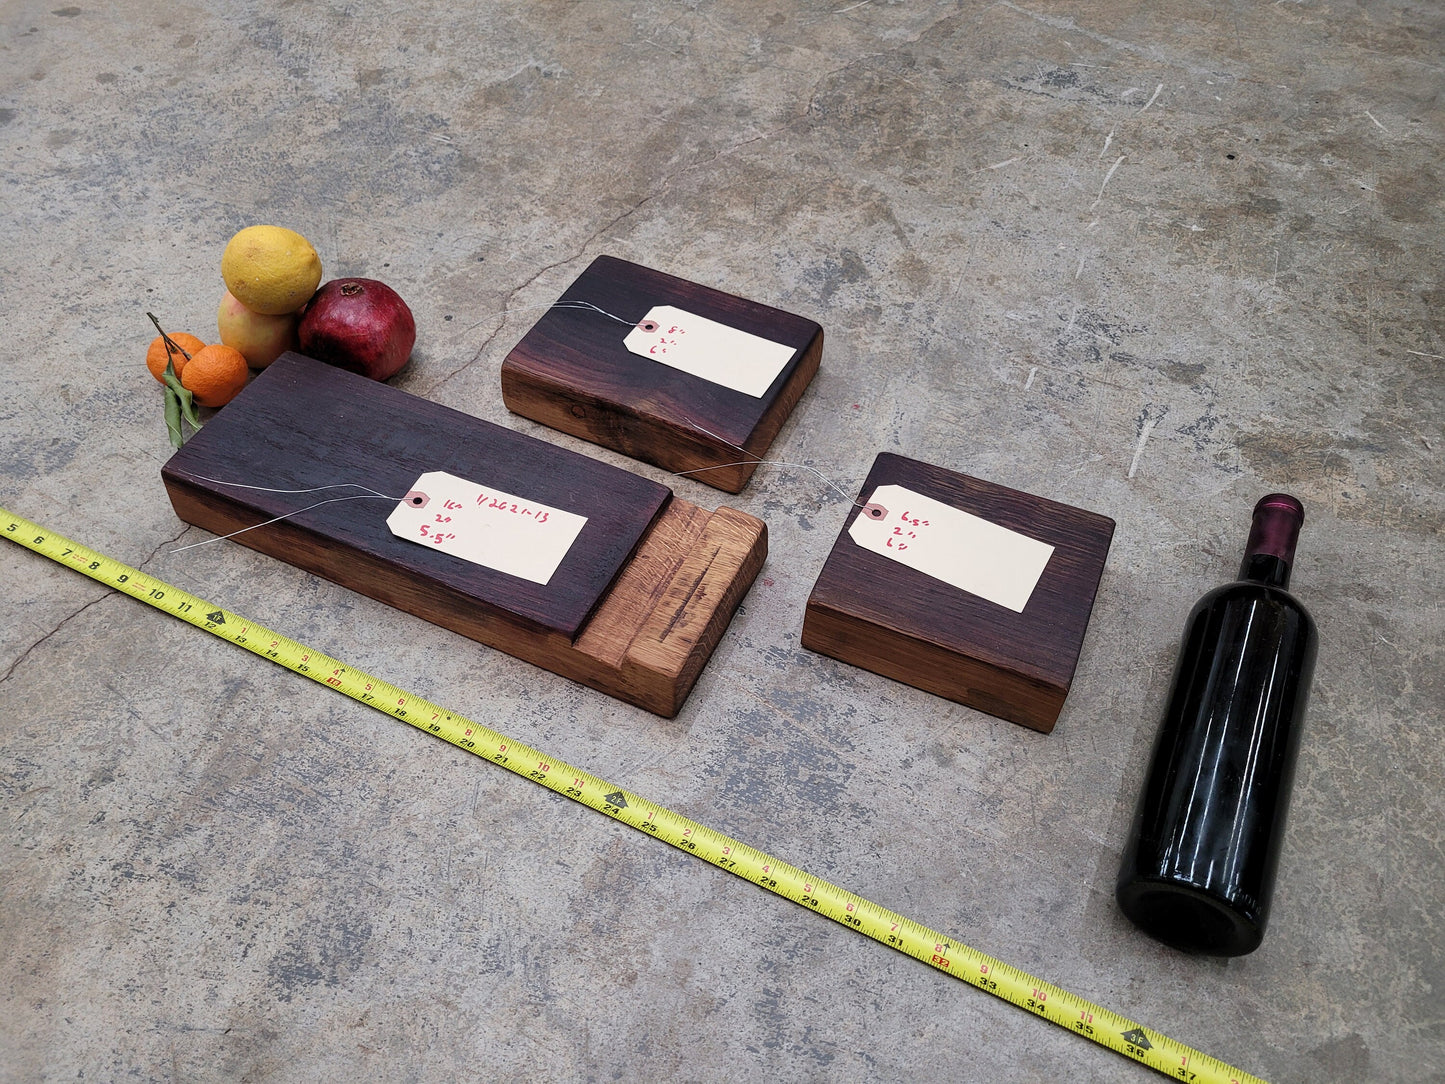 SALE Set of 3 Wine Barrel Cutting / Chopping / Charcuterie Boards Made from retired CA wine barrels. 100% Recycled!